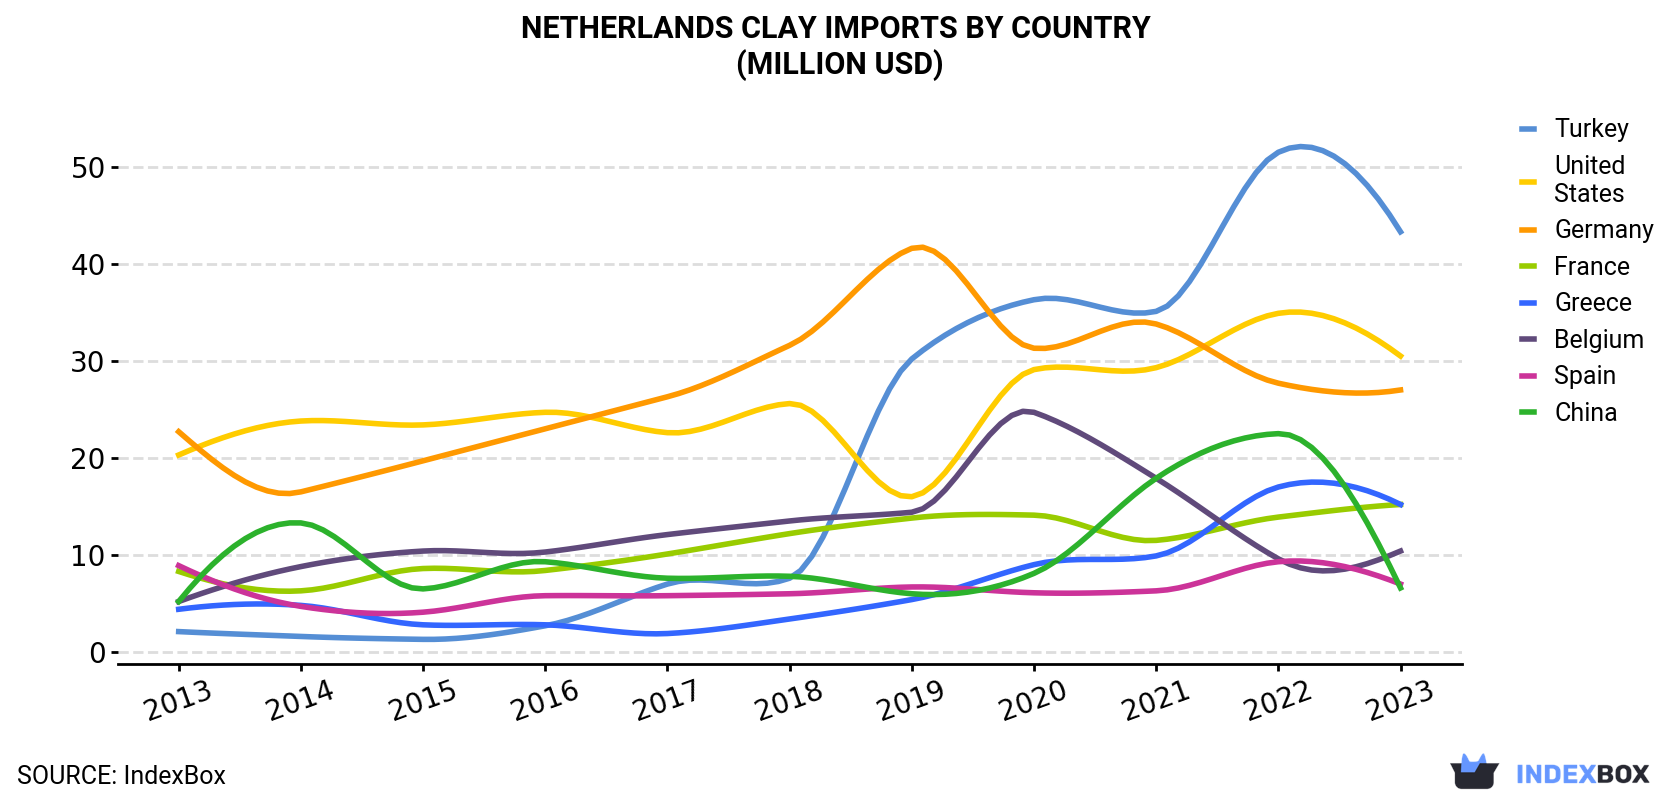 Netherlands Clay Imports By Country (Million USD)